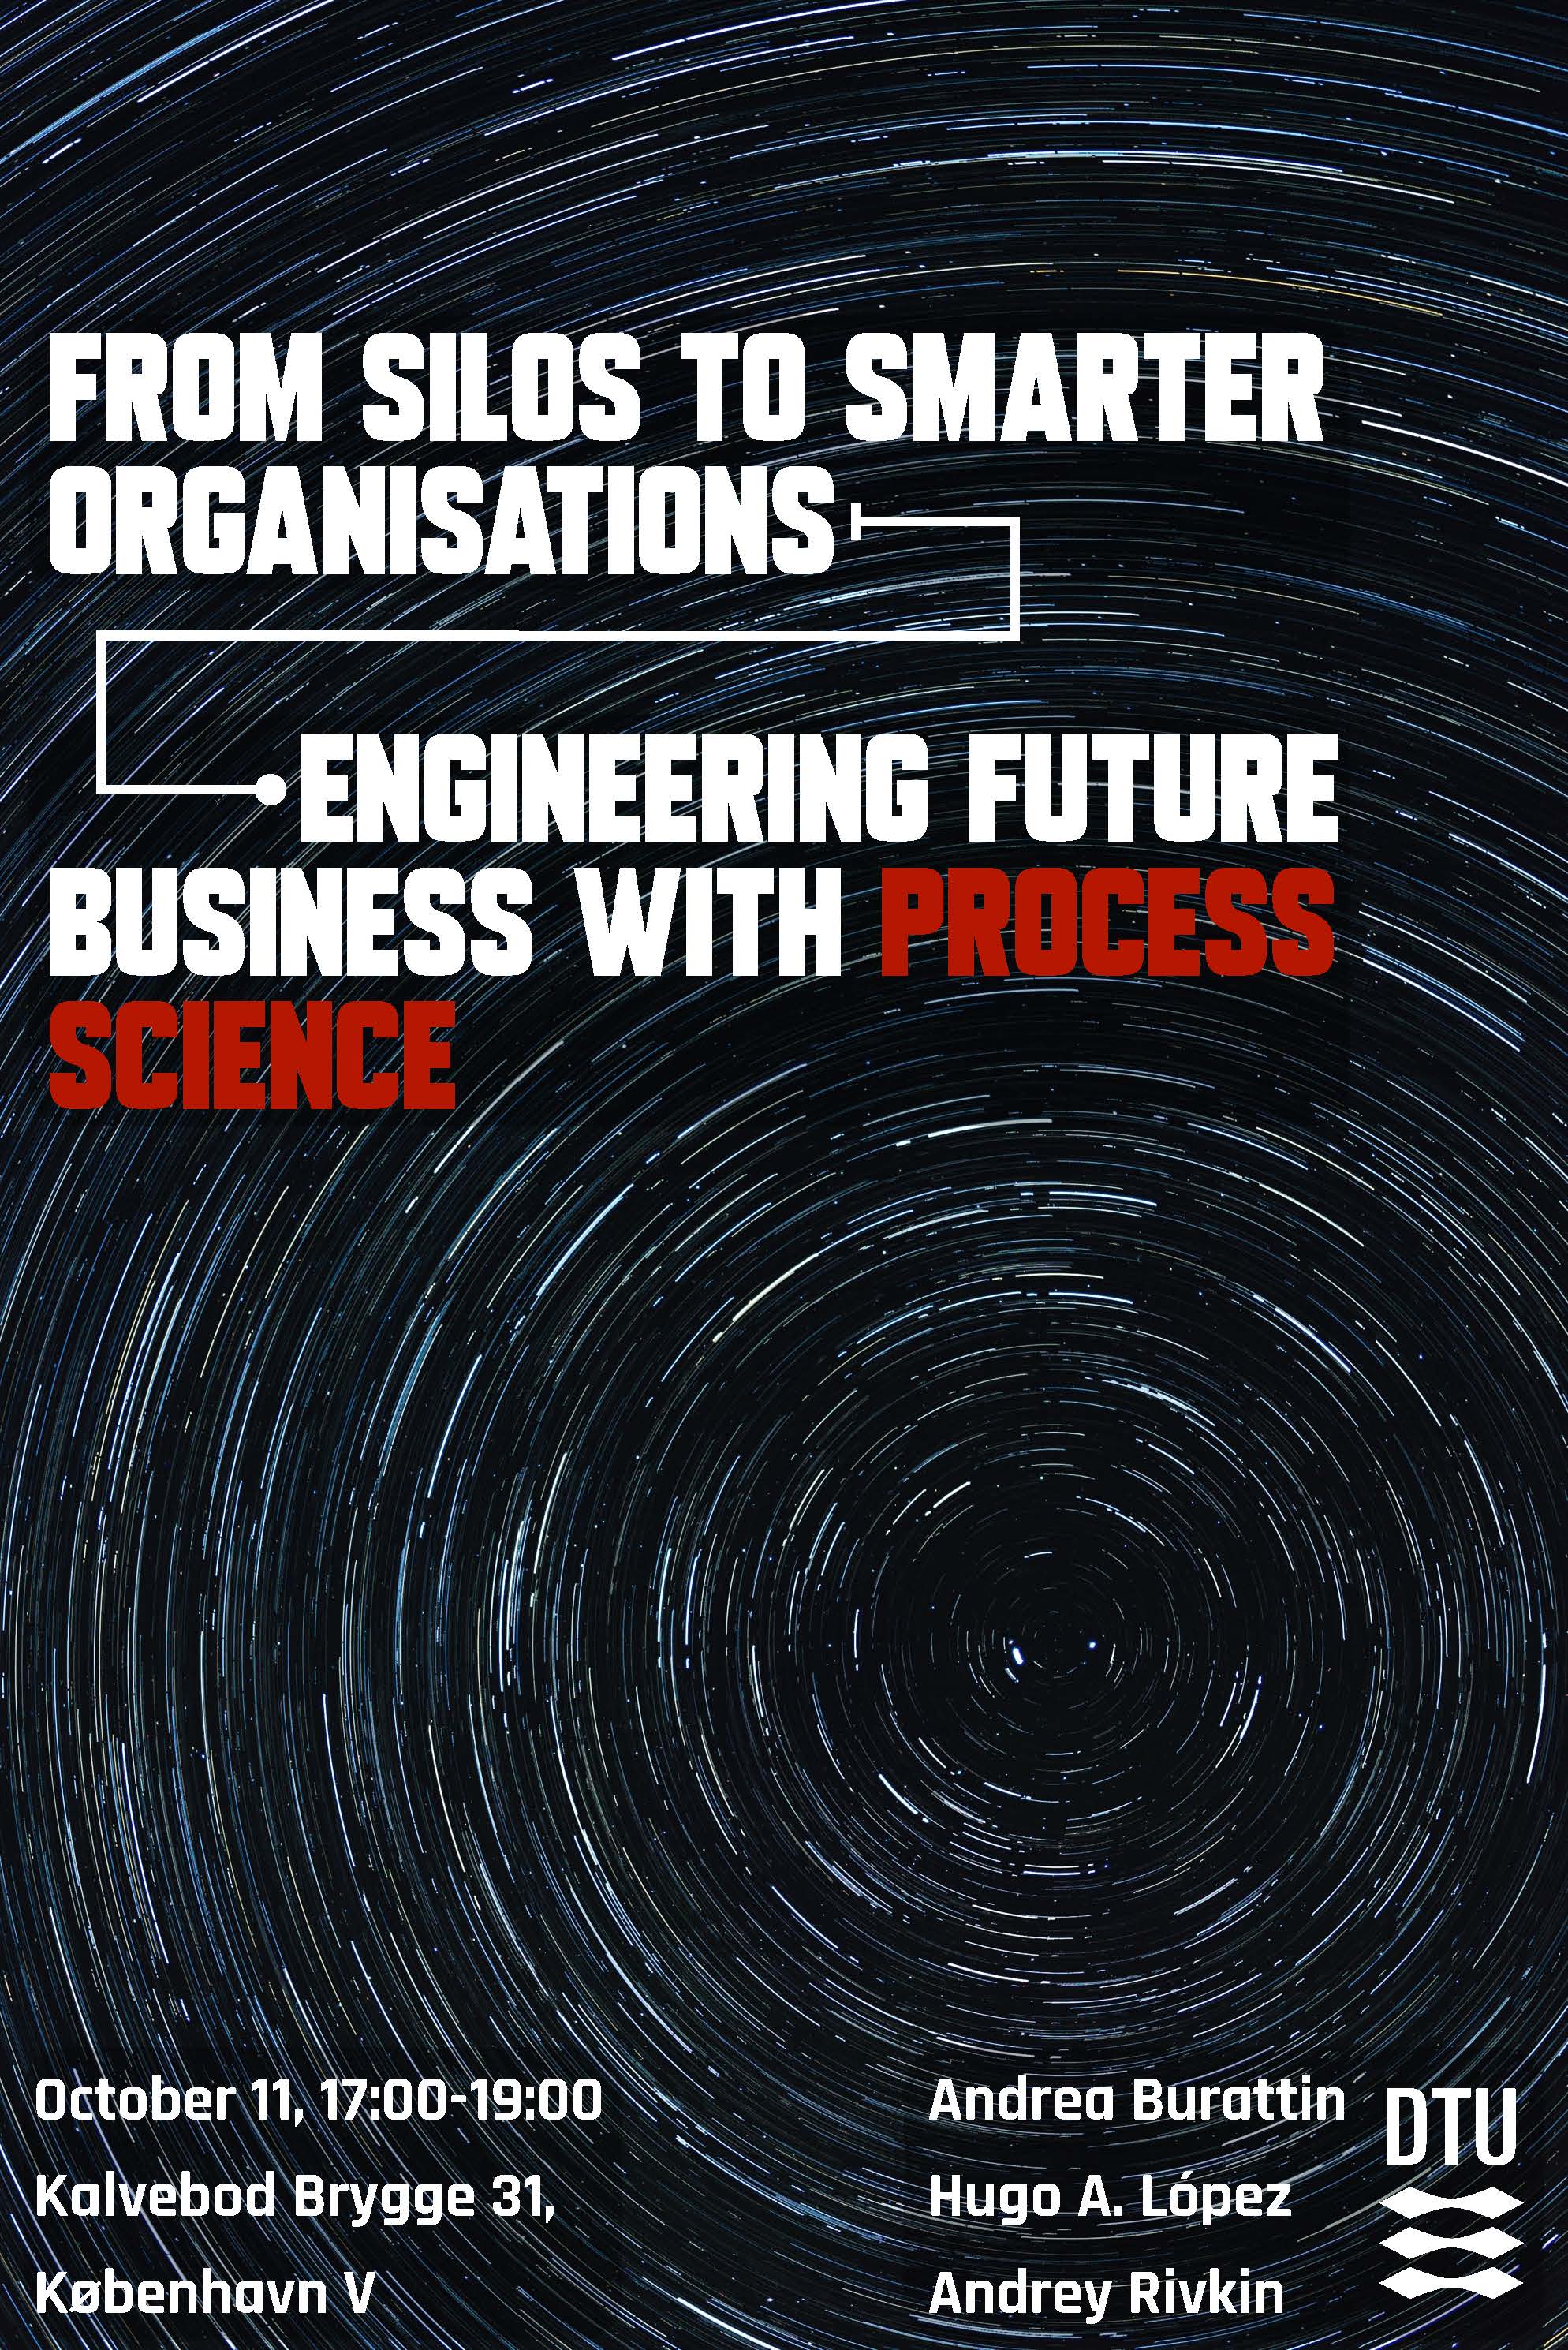 From silos to smarter organizations: Engineering future businesses with process science